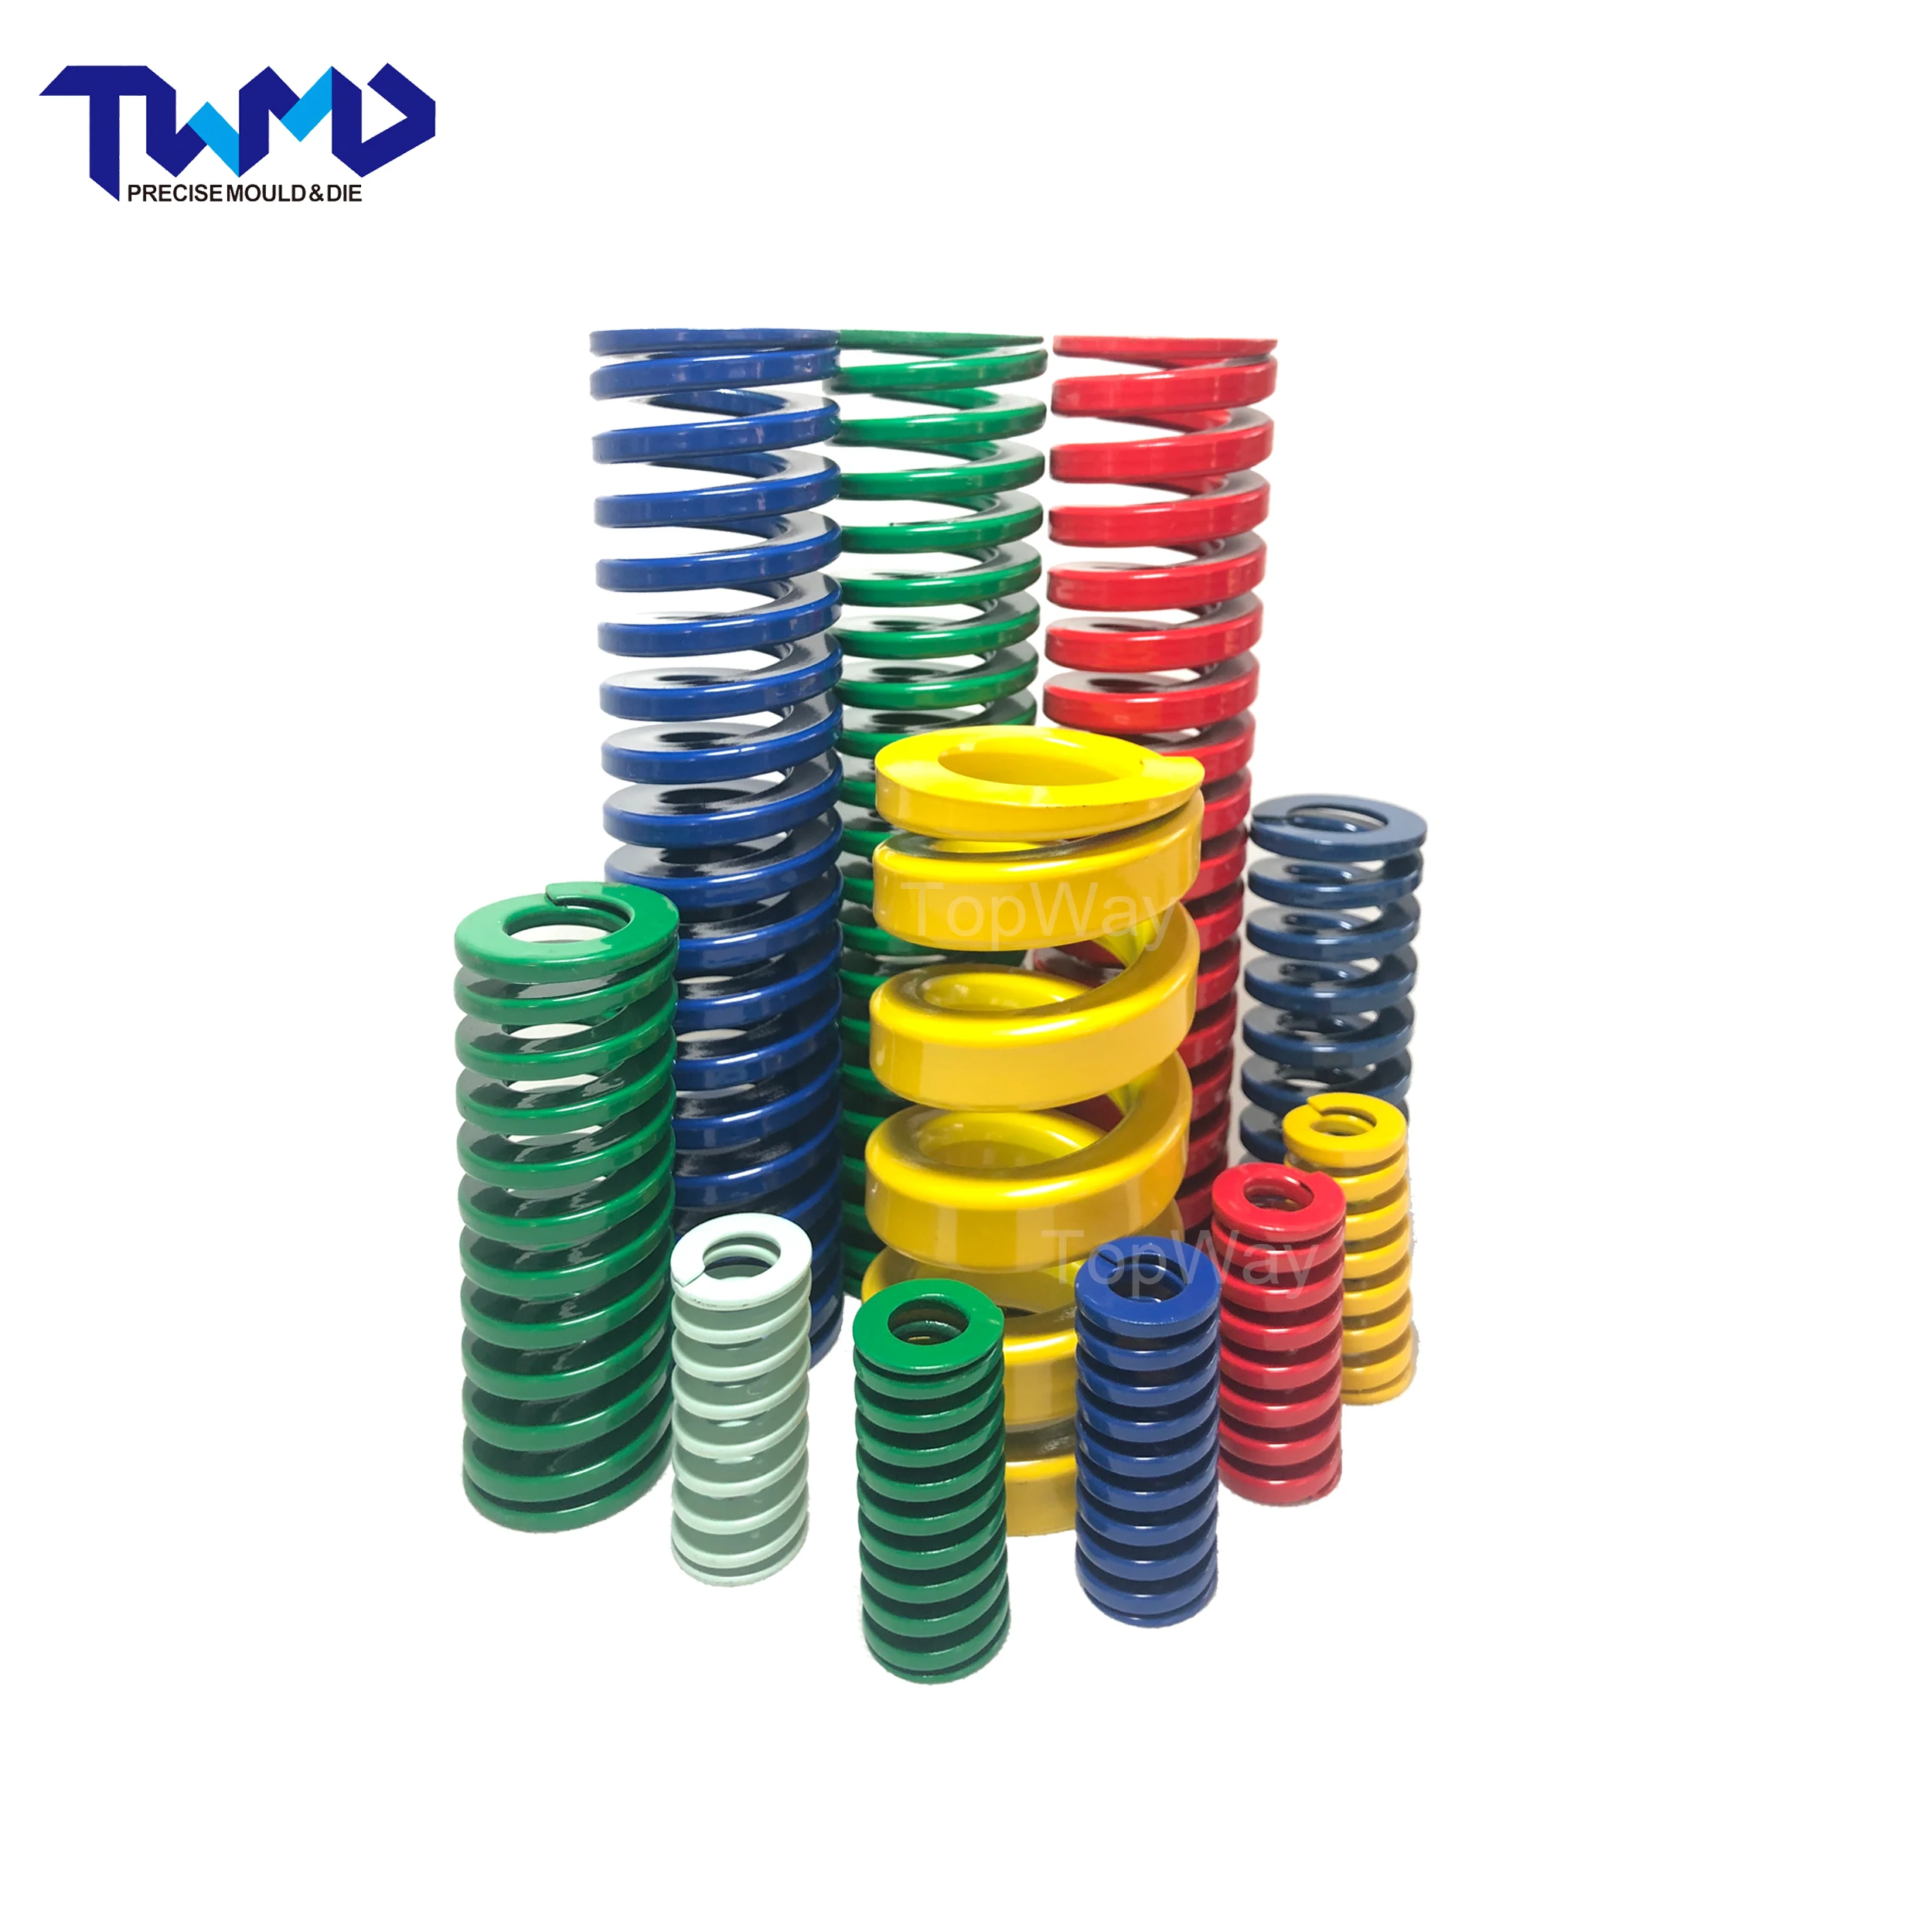 
ISO 10243 rectangular compression extra heavy load die mould spring 